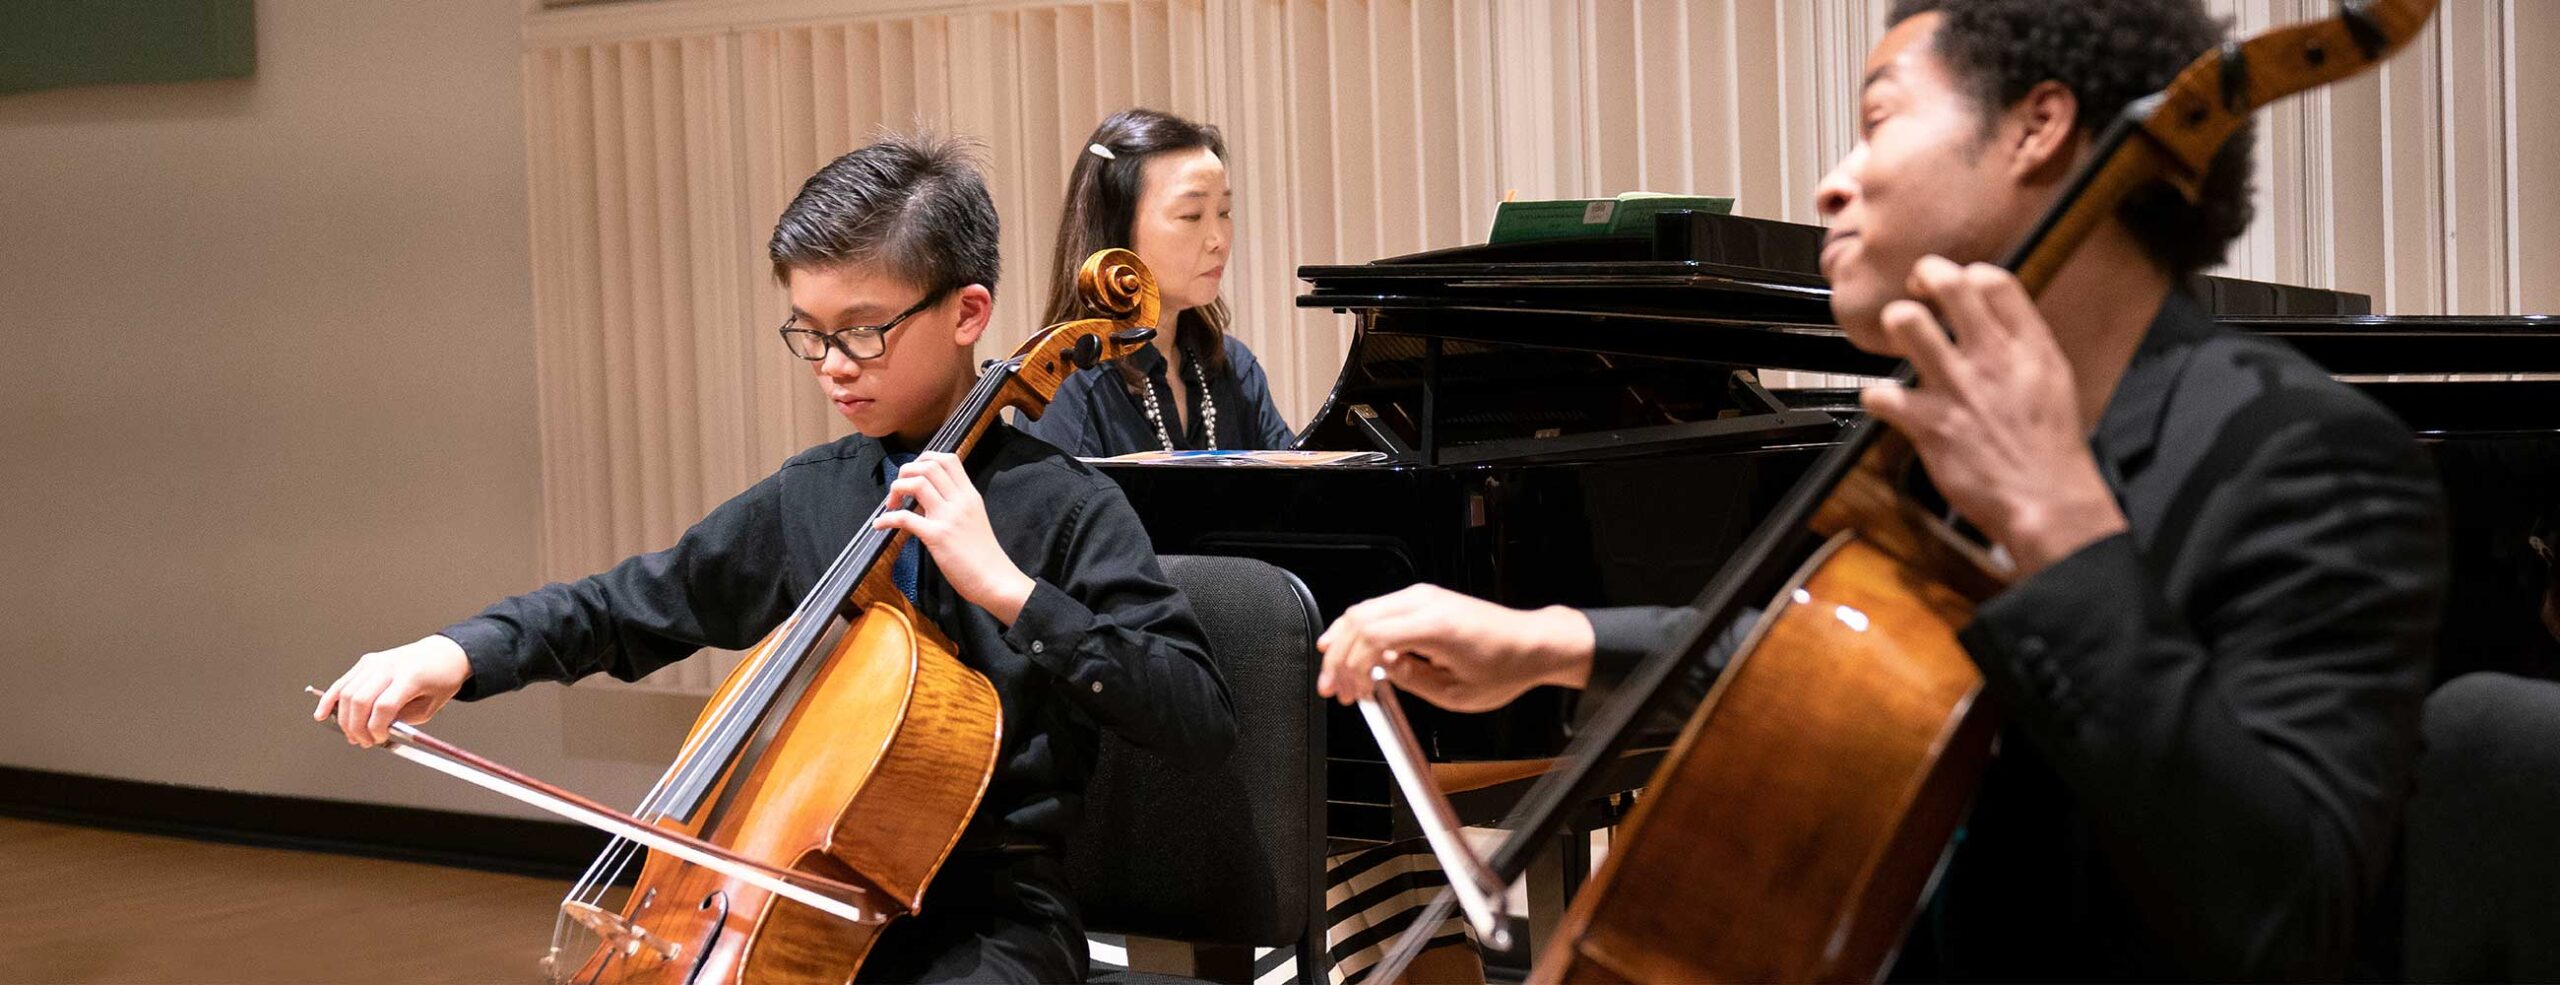 Cello students performing